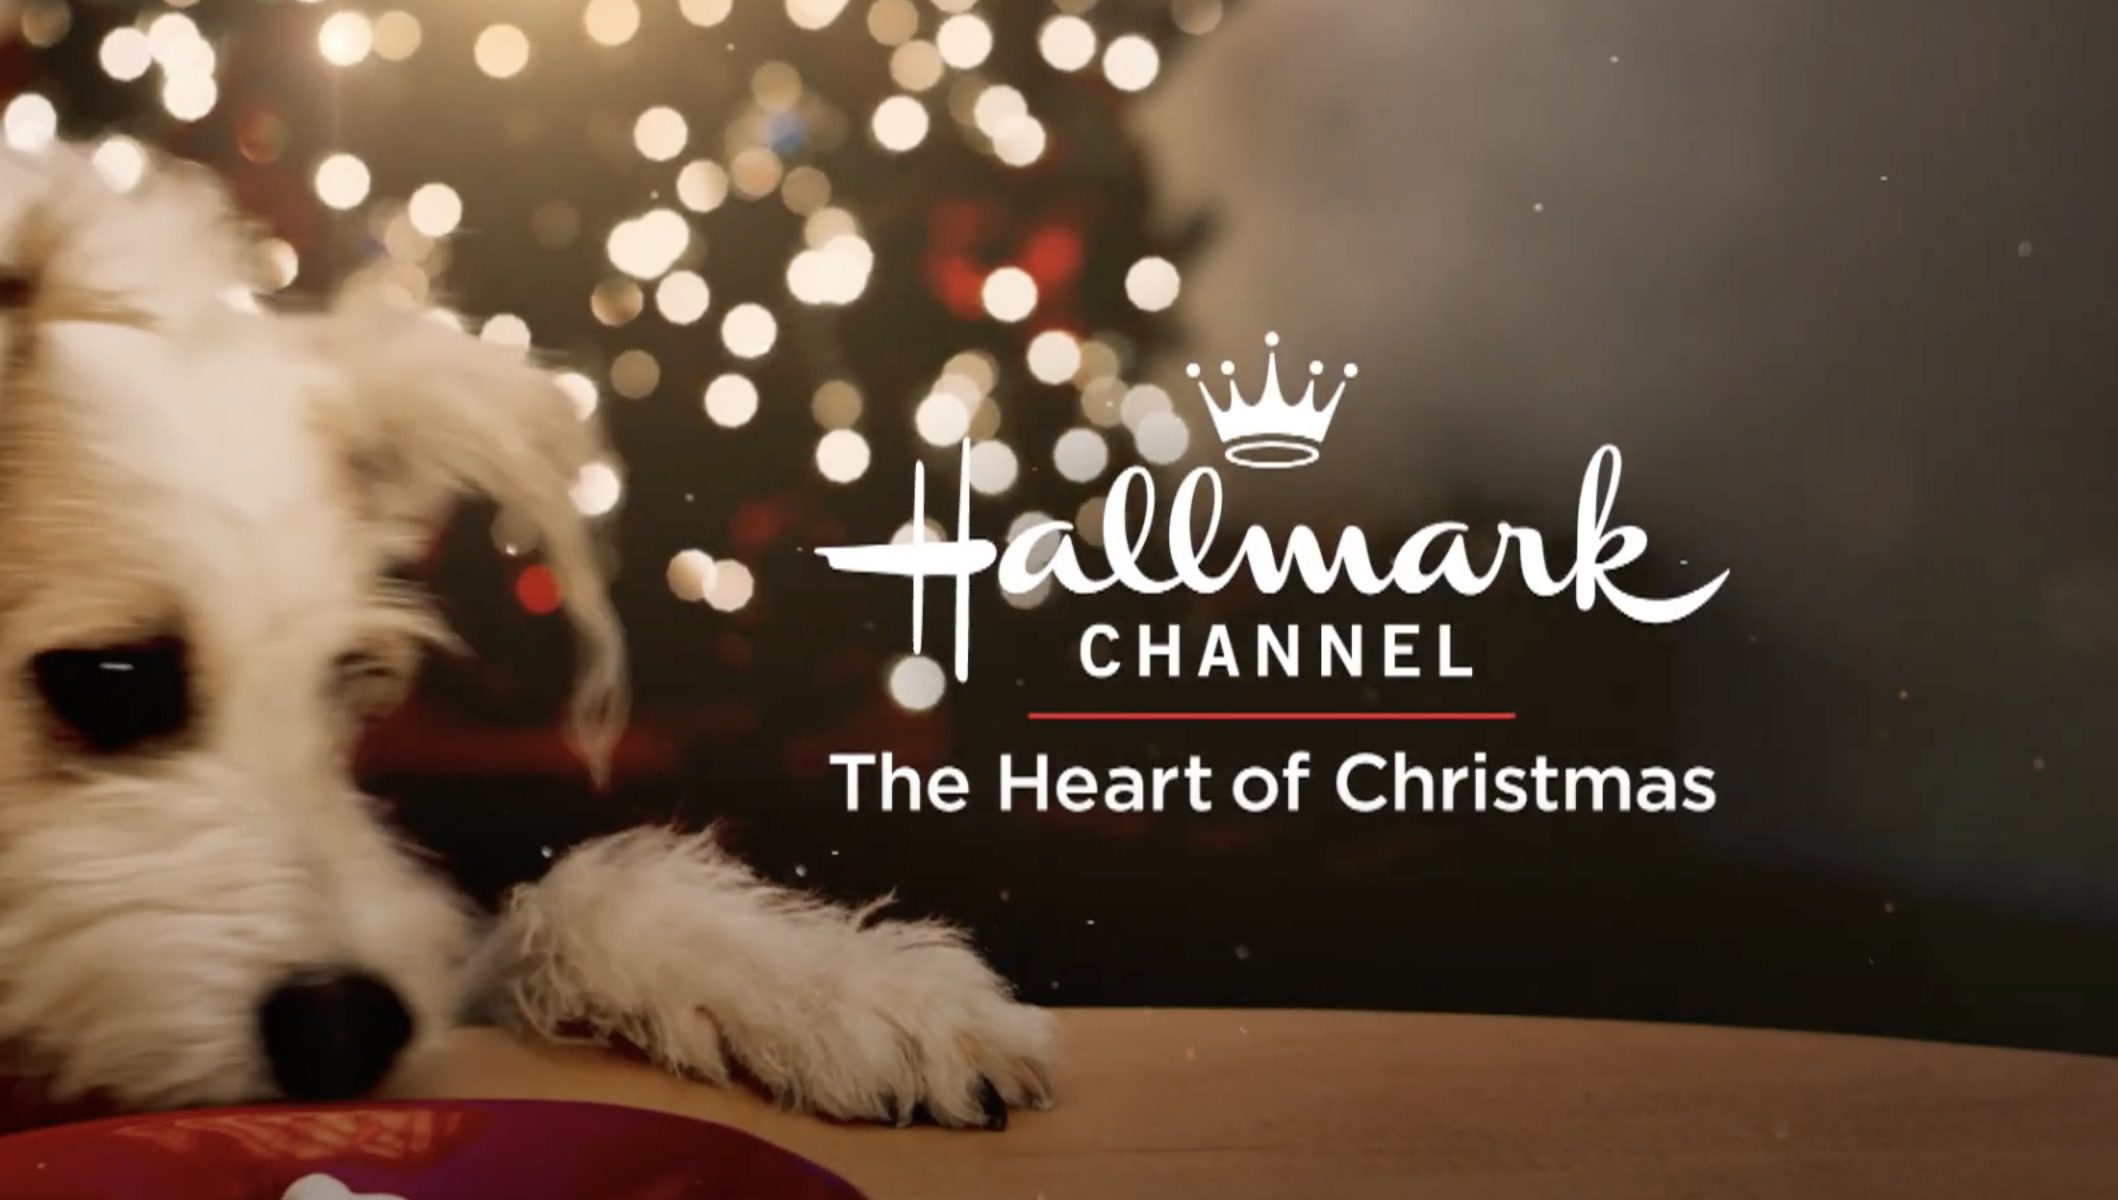 When Does Hallmark Channel Countdown To Christmas 2021 Begin?